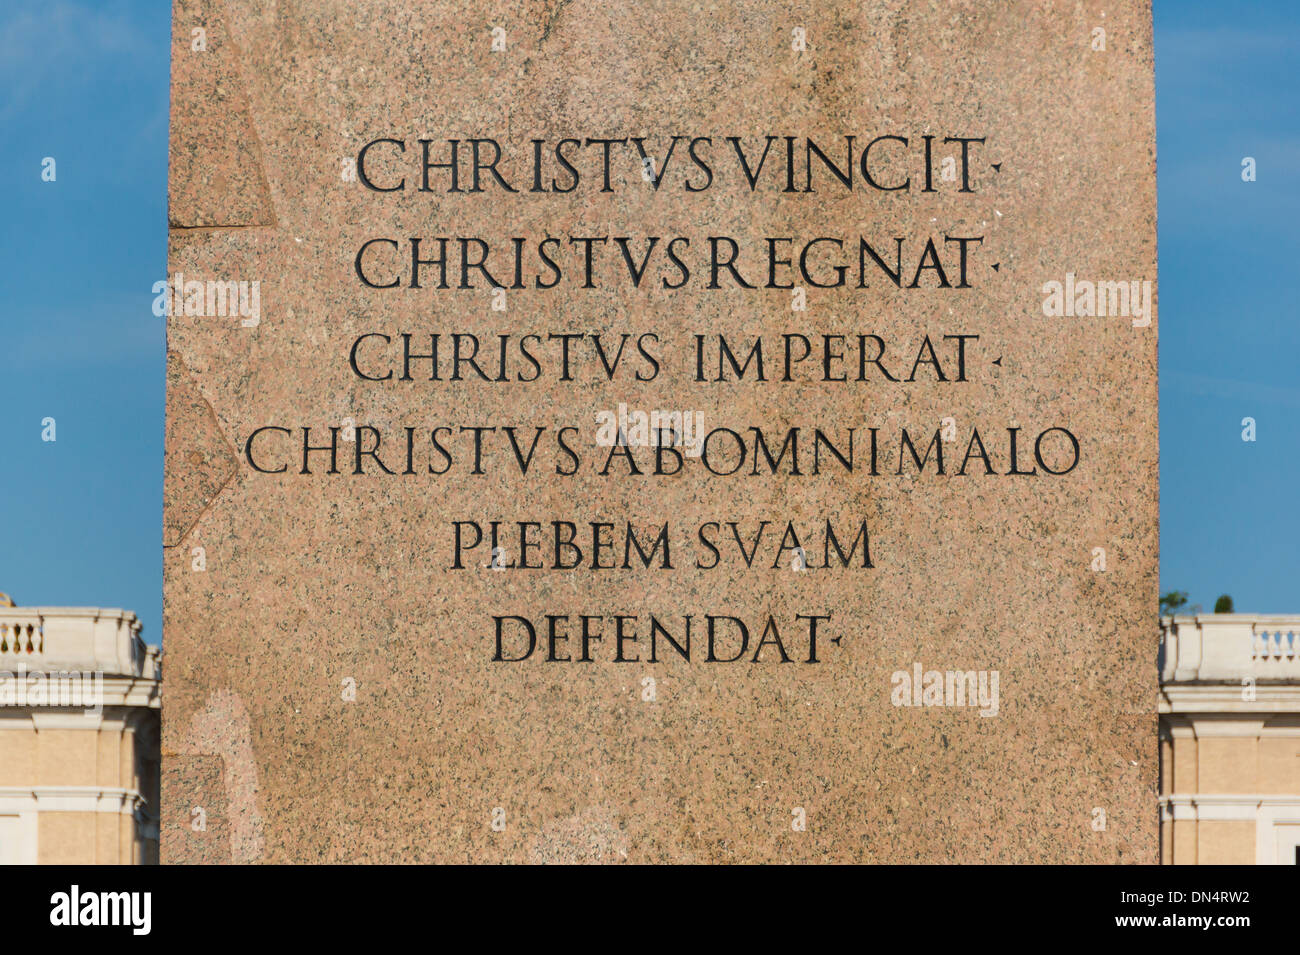 Christian latin text on the pedestal of the obelisk at Saint Peter's square, Vatican City. Stock Photo